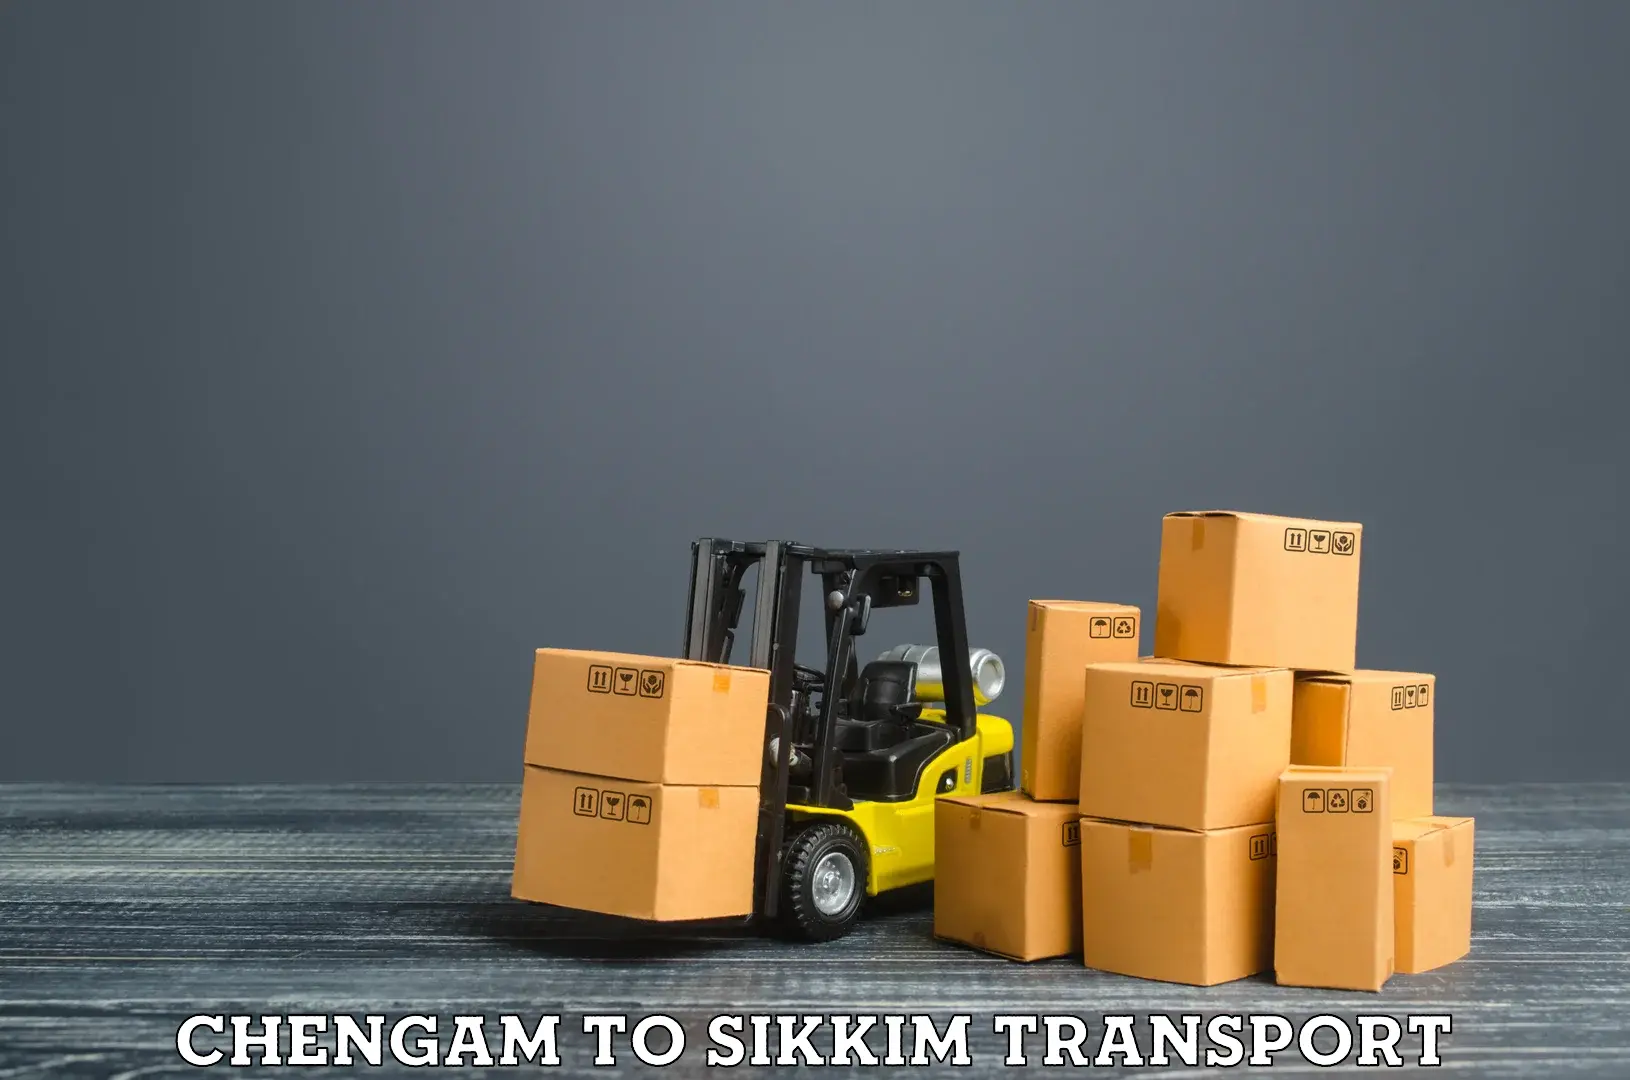 Express transport services Chengam to Pelling